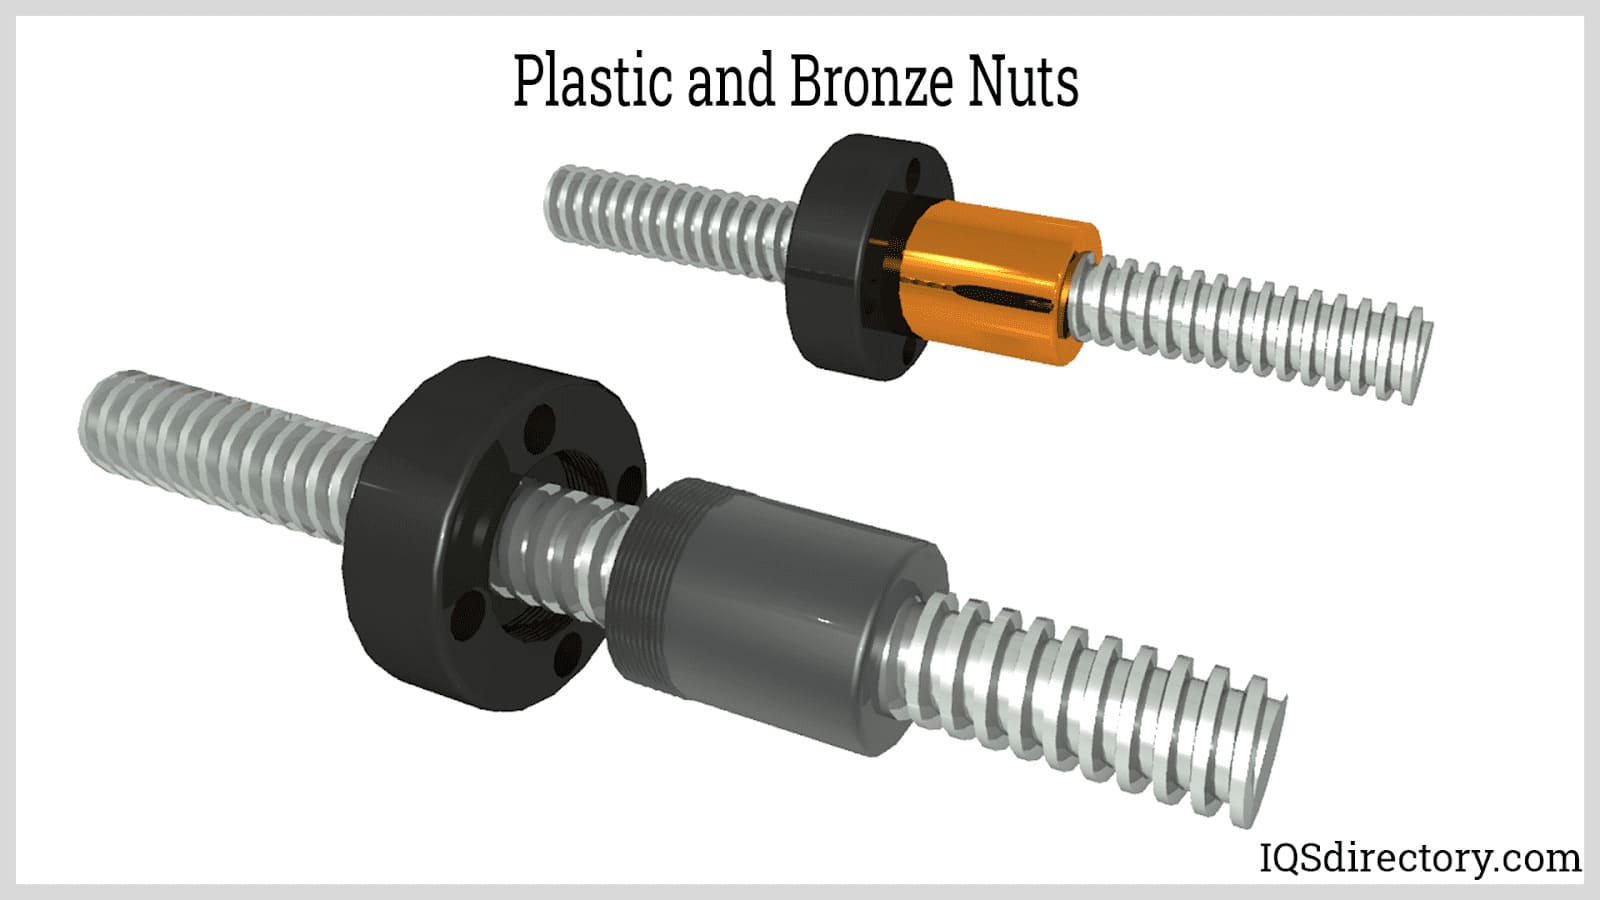 Plastic and Bronze Nuts